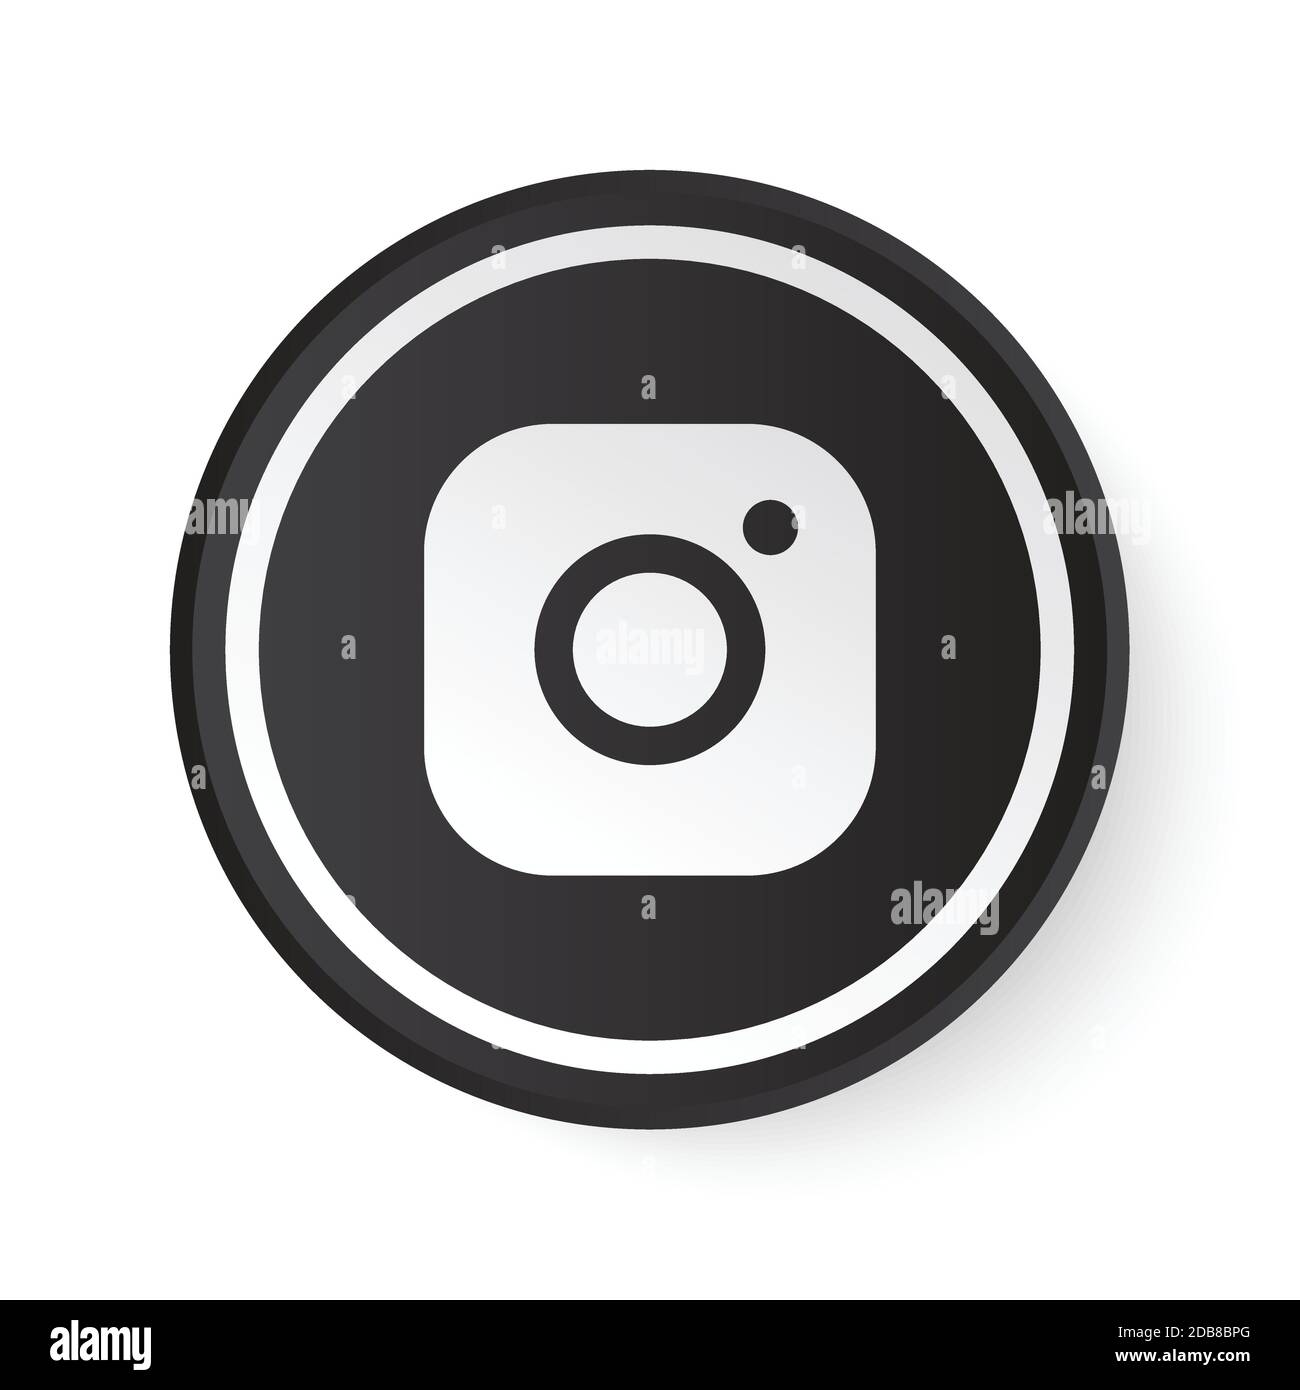 Instagram Circle Black Button With White Logo Social Media Icon With Modern Design For White Background 3d Round Template With Beautiful Shape Stock Vector Image Art Alamy